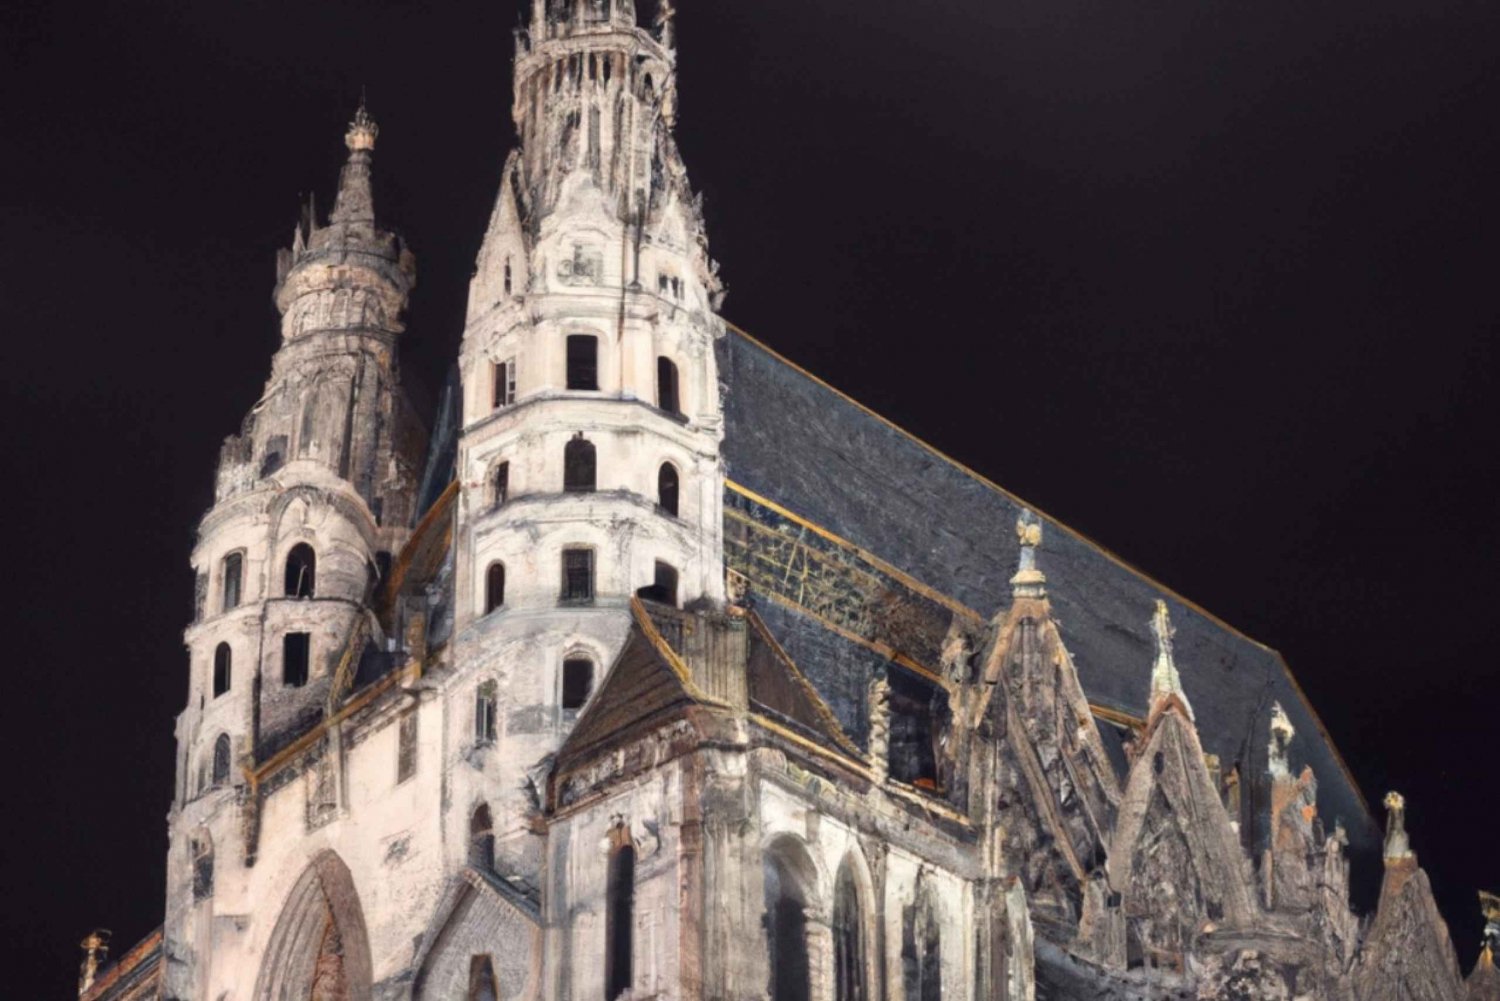 Wien: Self-Guided Mystery Tour by Stephansdom (engelsk)